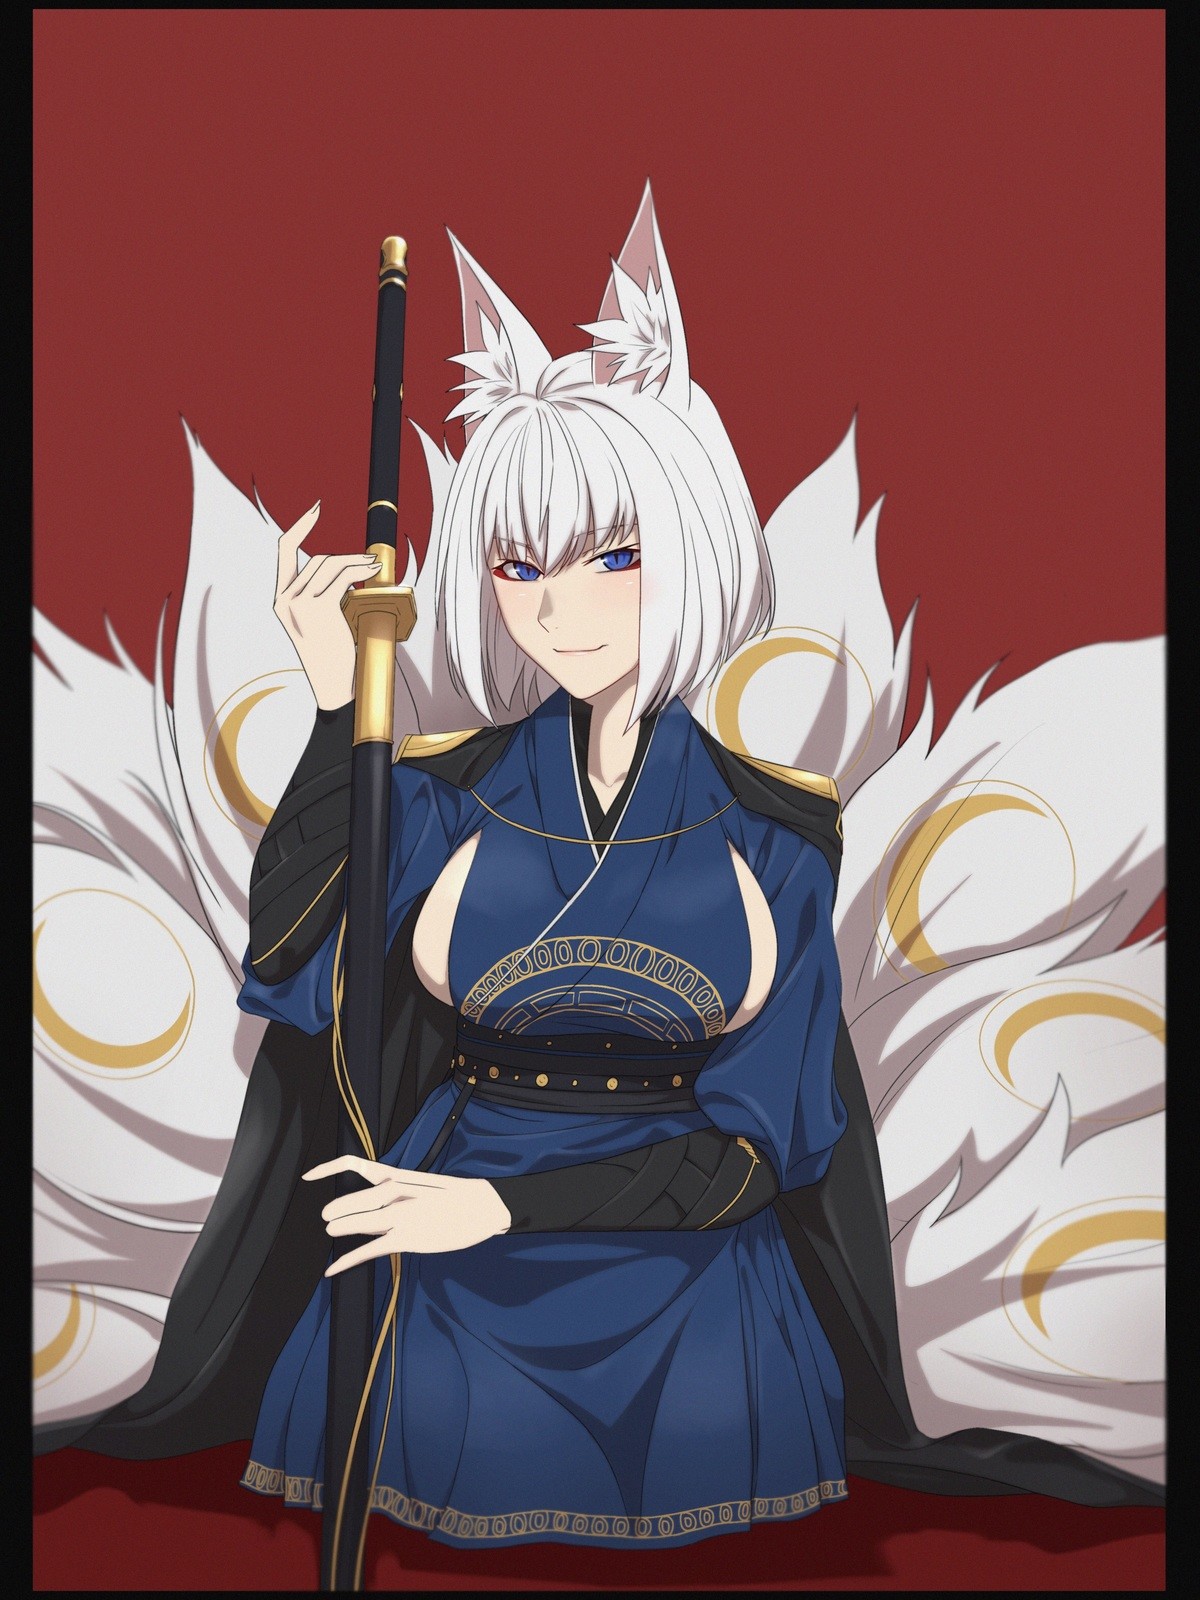 Kaga. .. I want her skin to have voice lines. But after what happened with the shrine visit, I know it's not happening